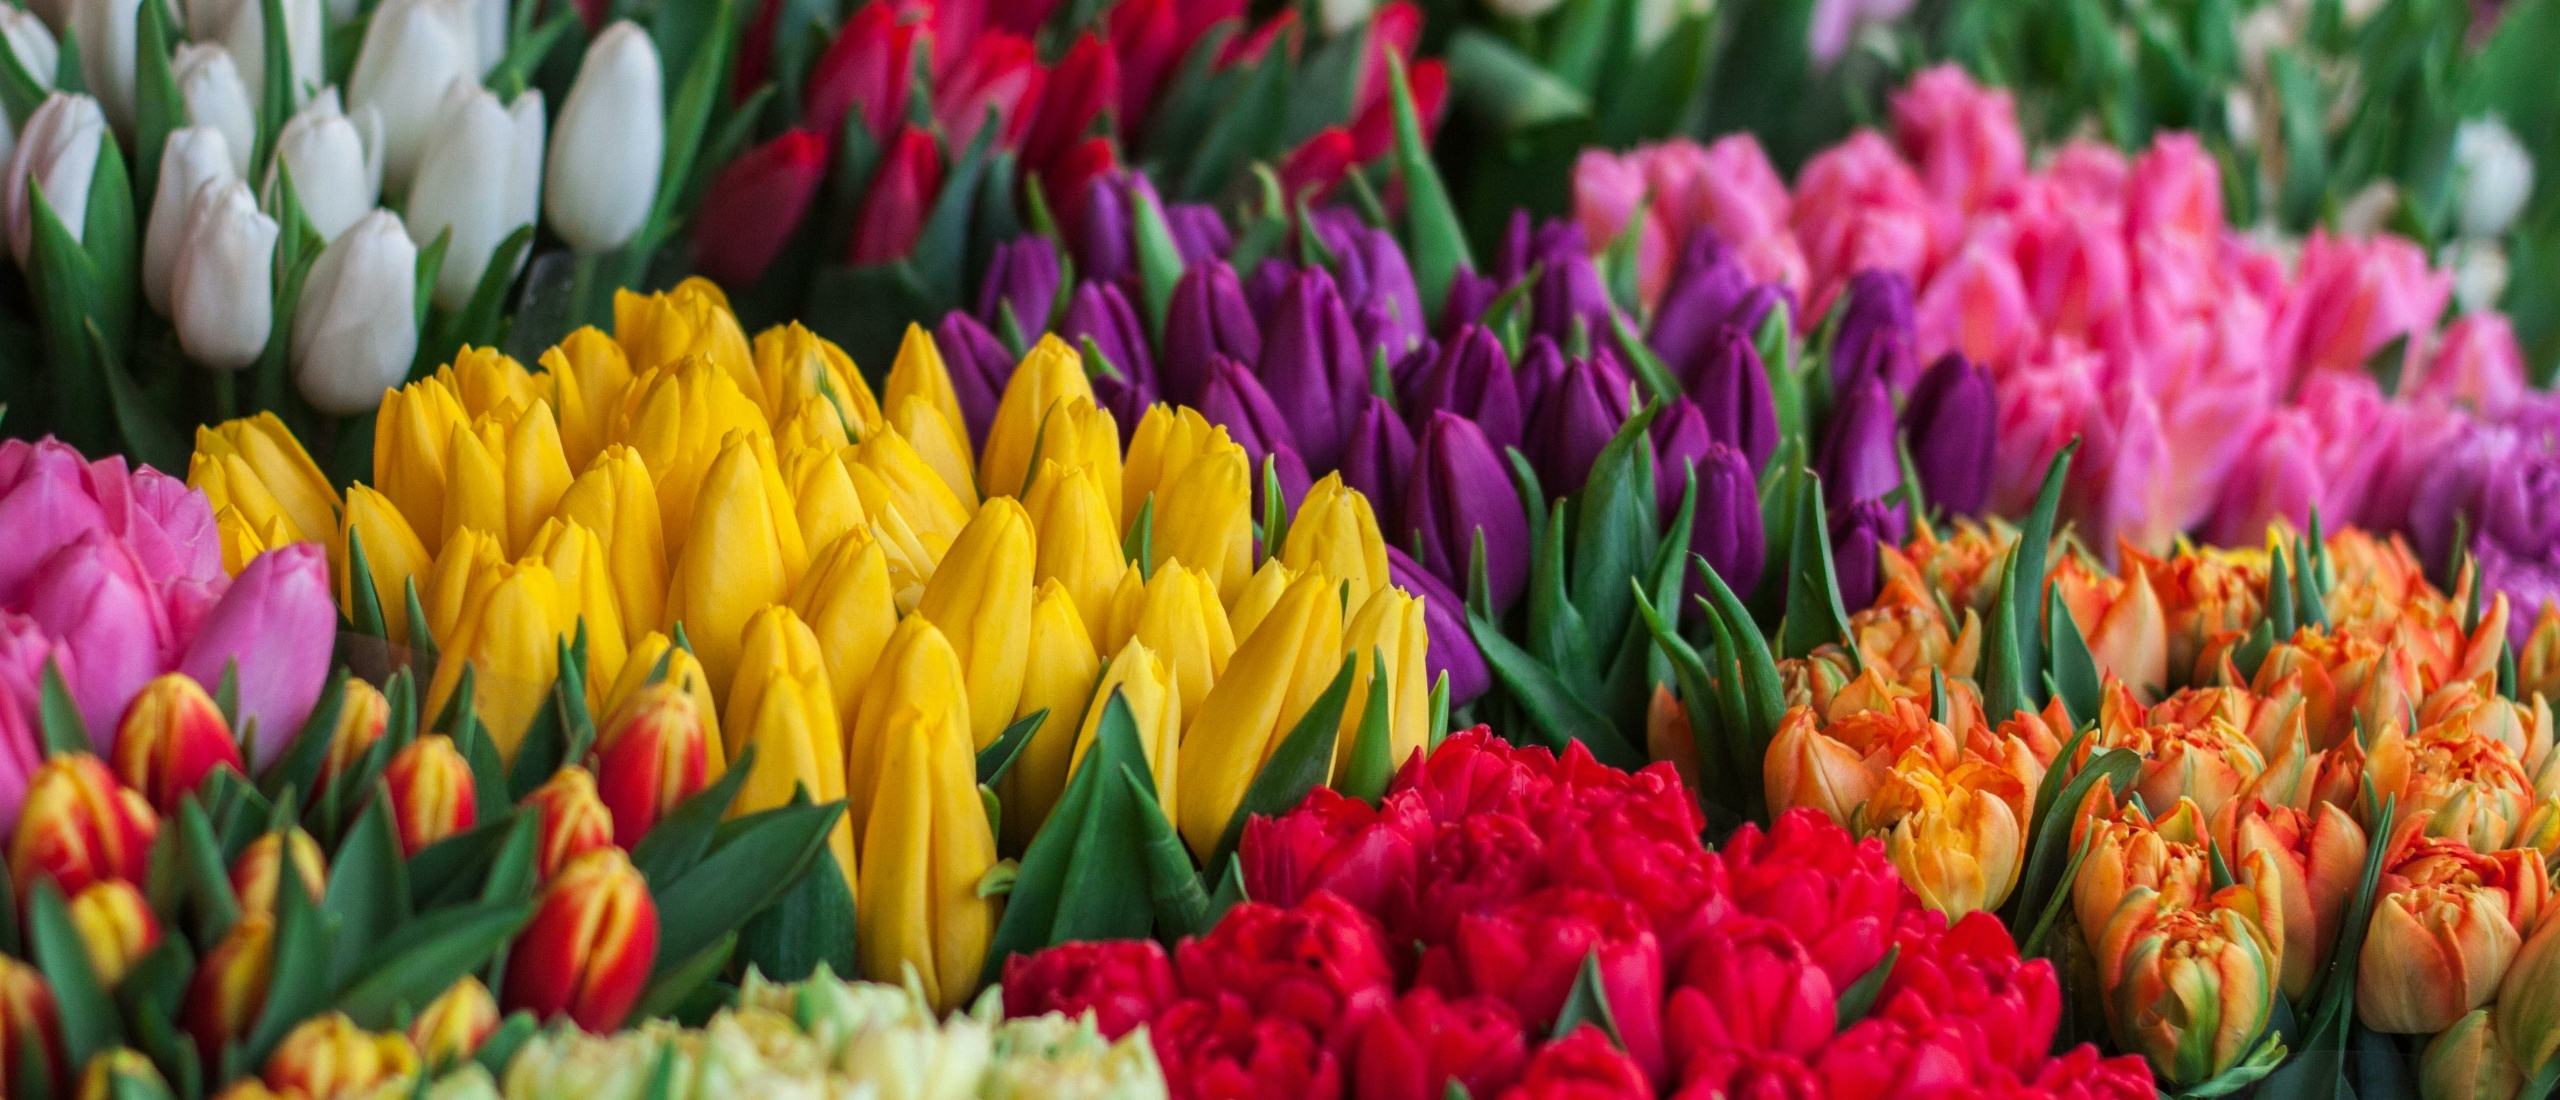 The Rich History of Tulips